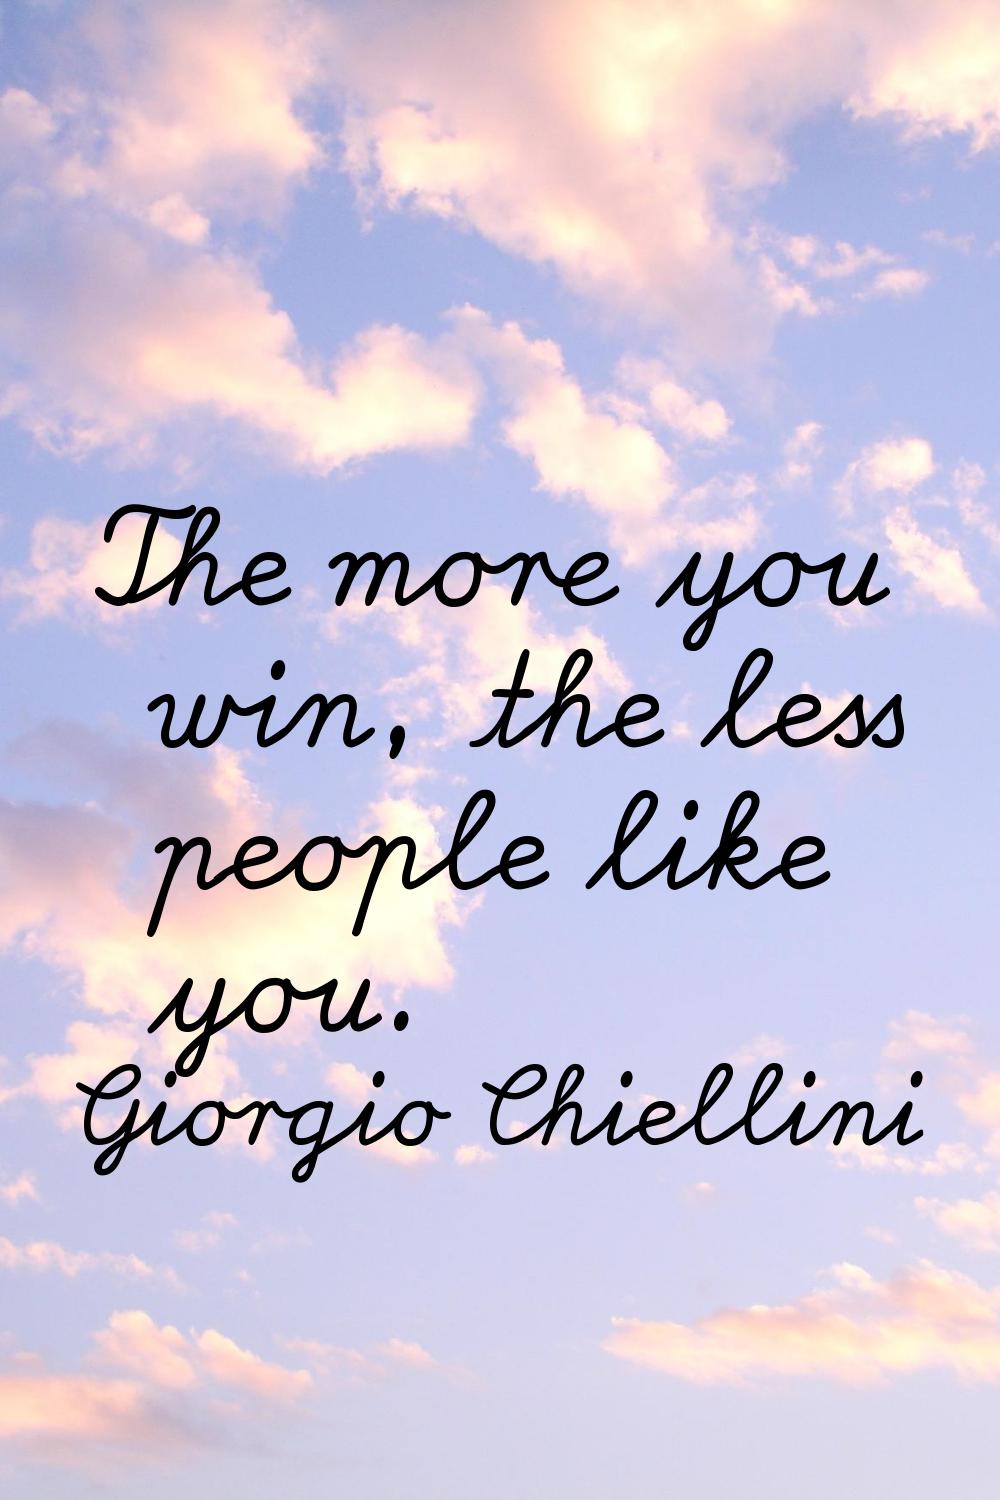 The more you win, the less people like you.